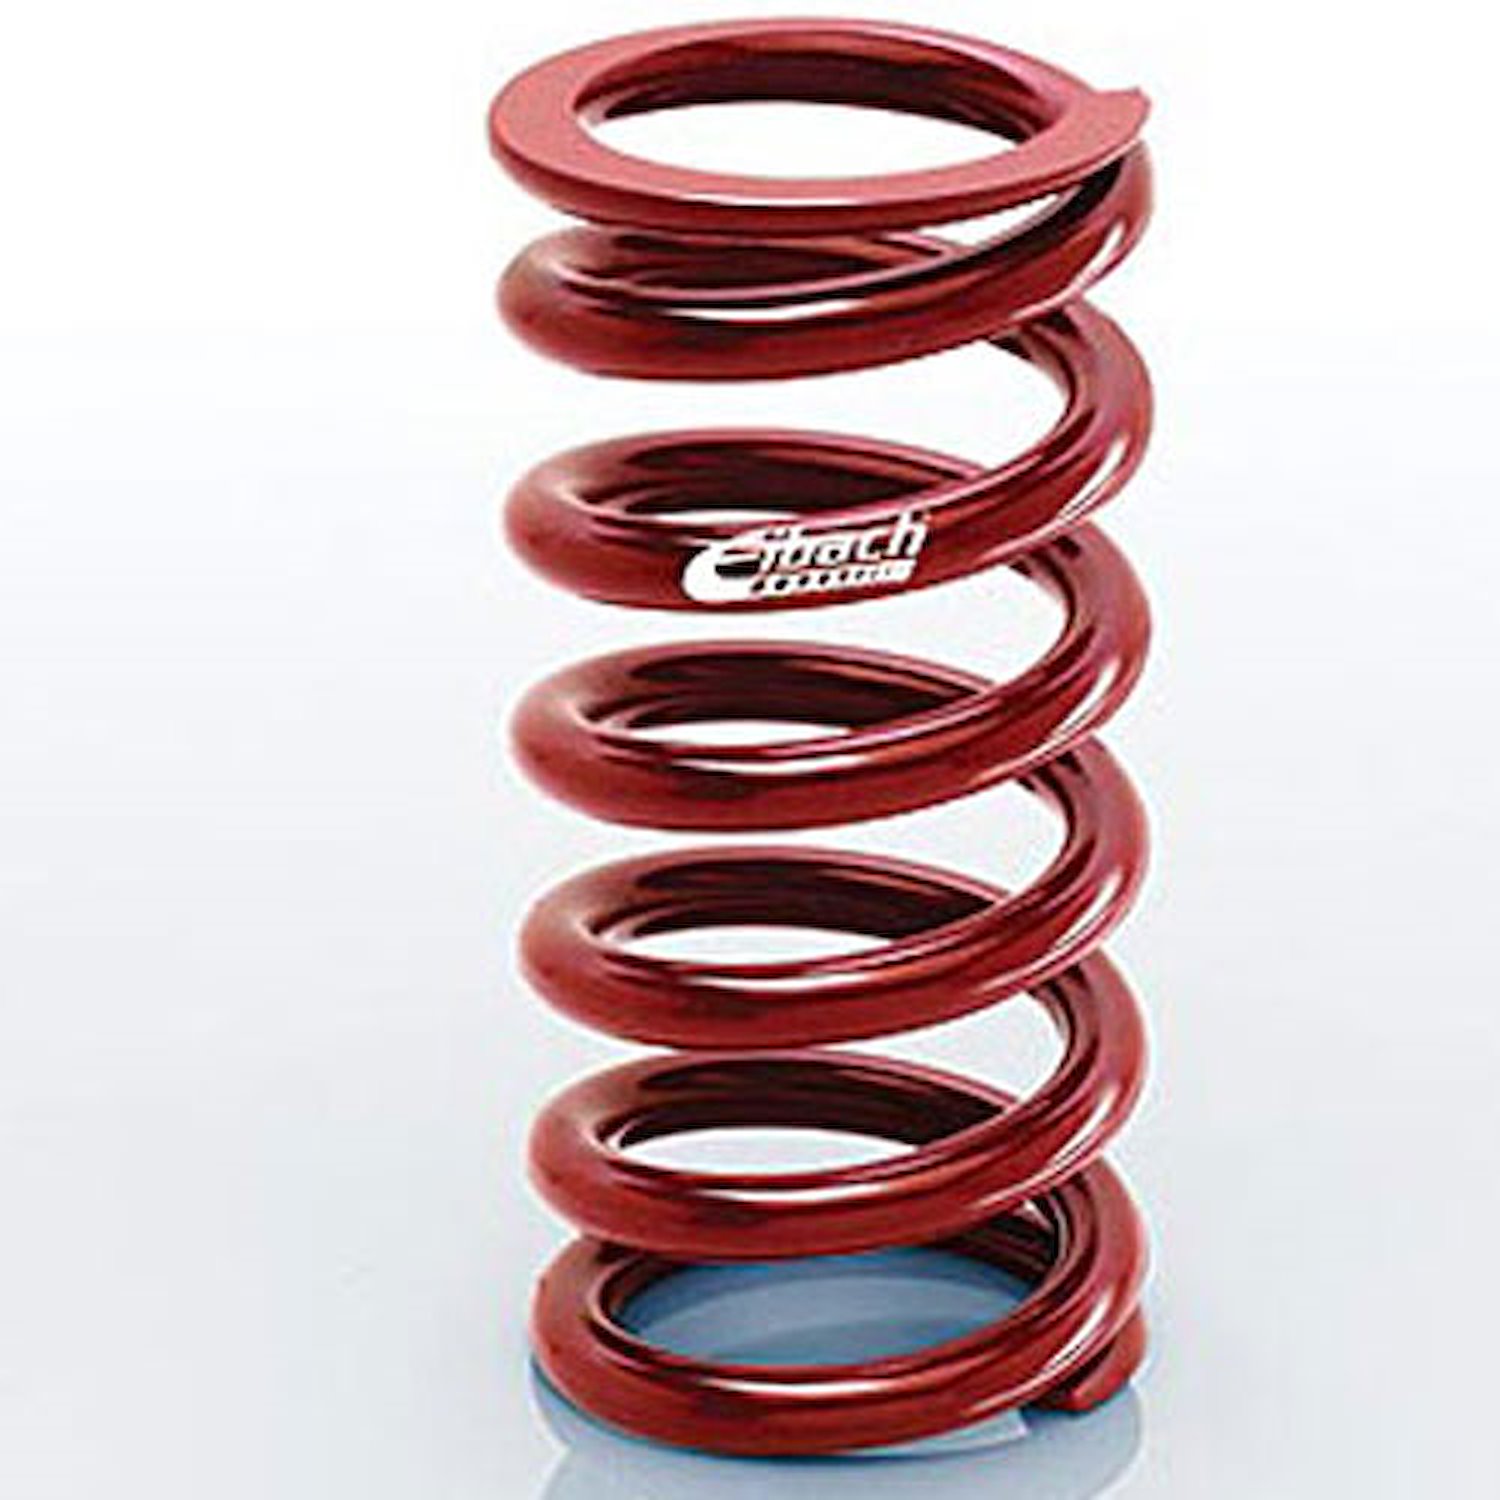 0950.500.1300 EIBACH CONVENTIONAL FRONT SPRING